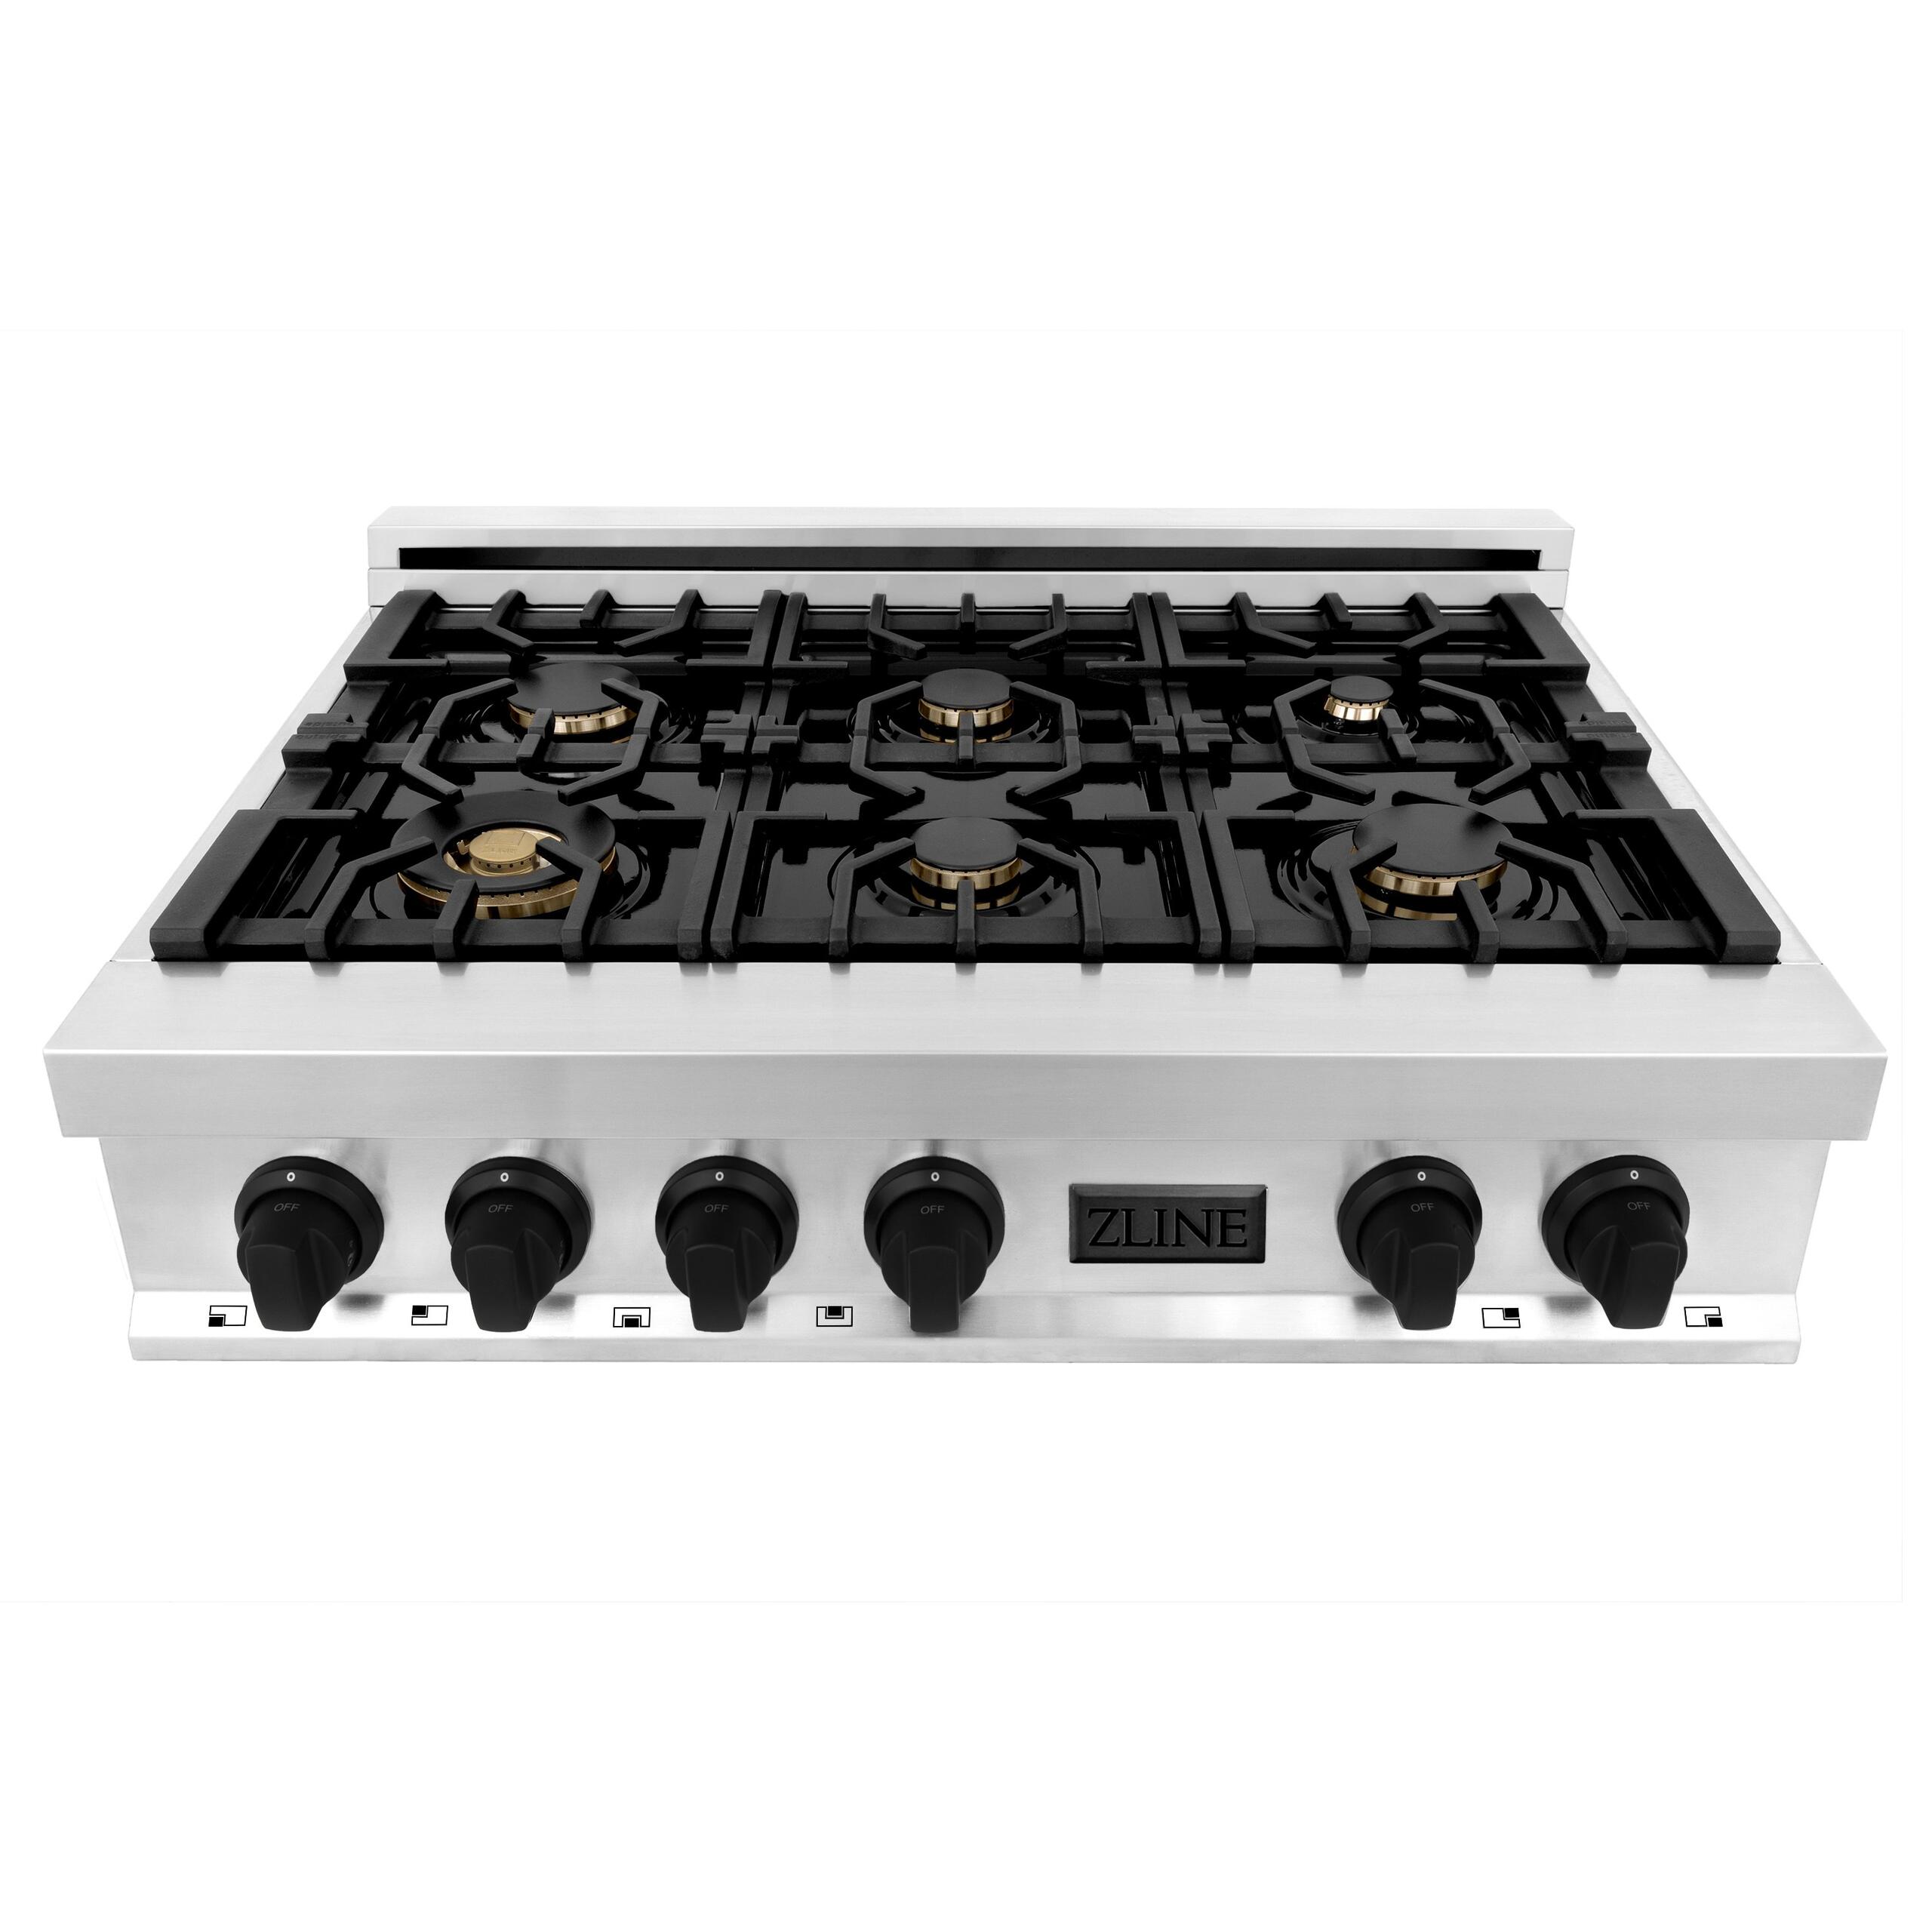 Zline Kitchen and Bath ZLINE Autograph Edition 36" Porcelain Rangetop with 6 Gas Burners in Stainless Steel and Matte Black Accents RTZ36MB